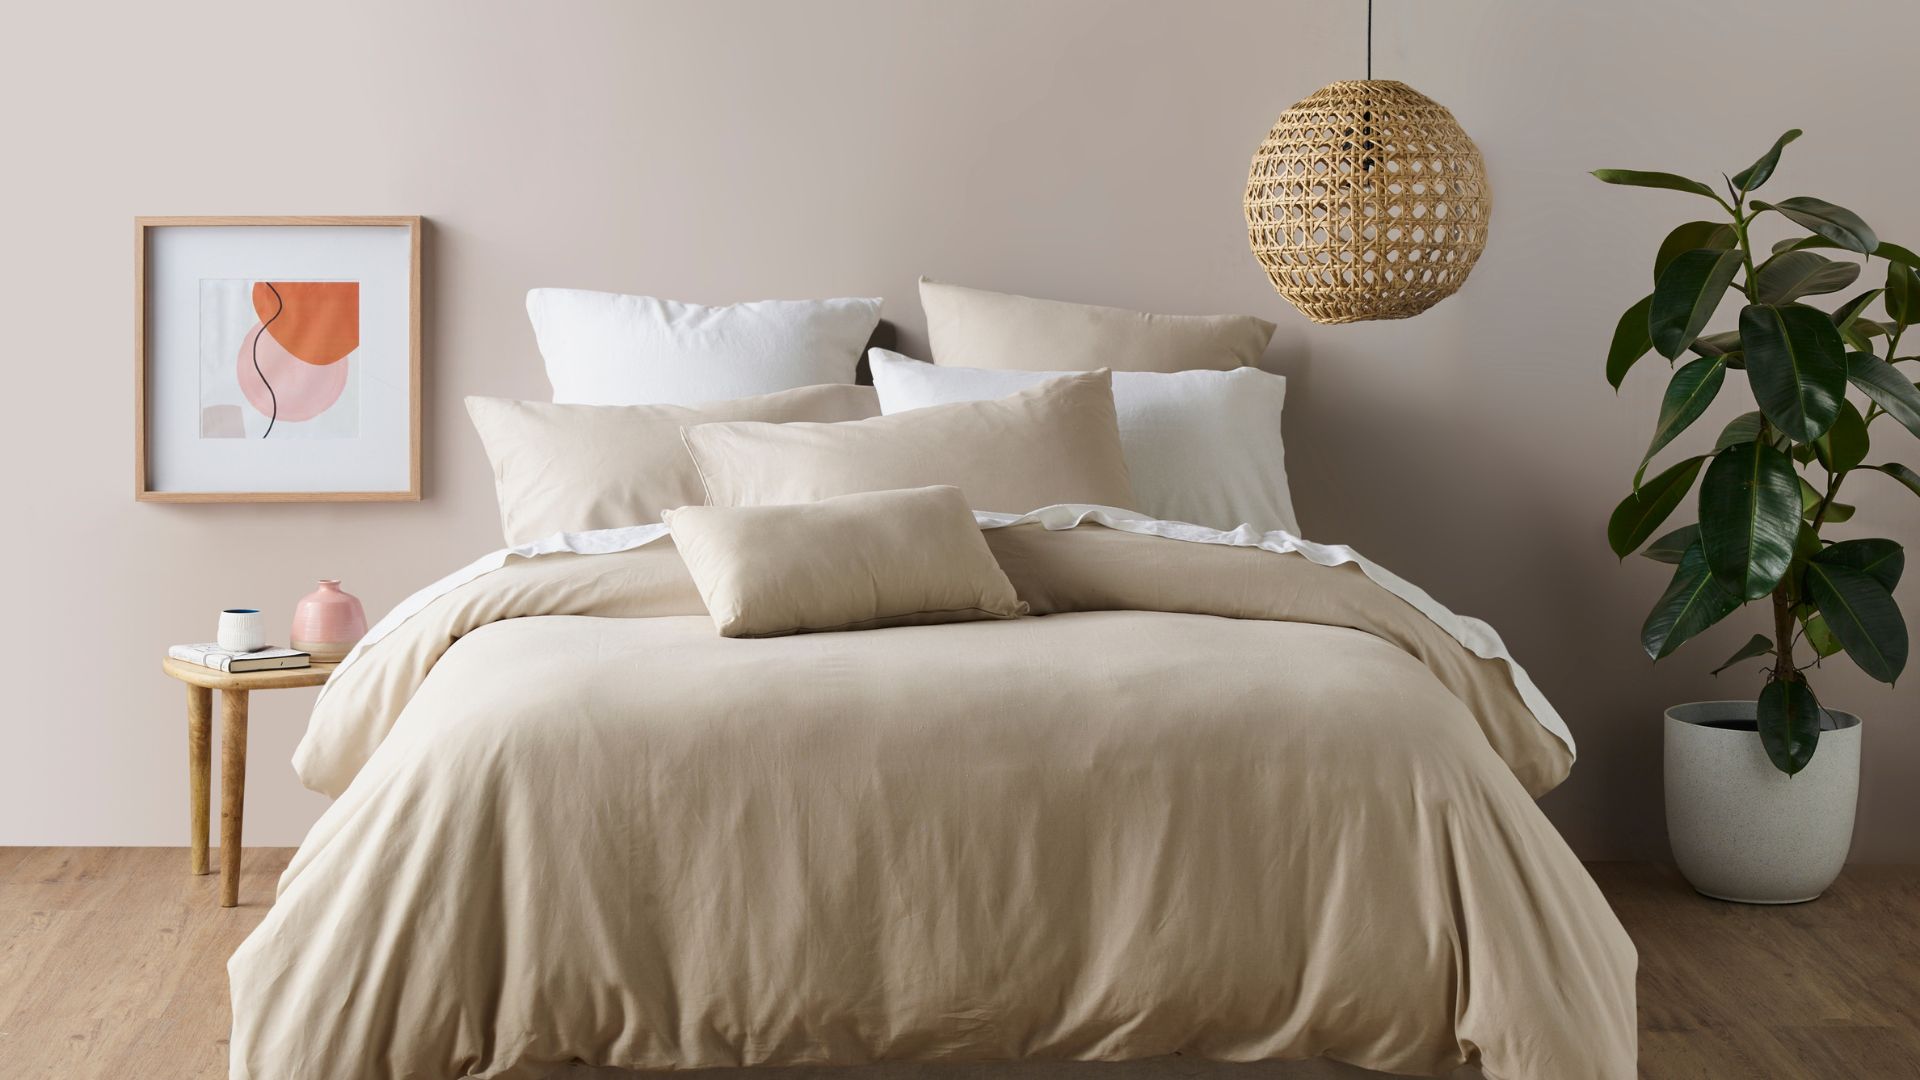 How To Create A Neutral Aesthetic-Inspired Bedroom